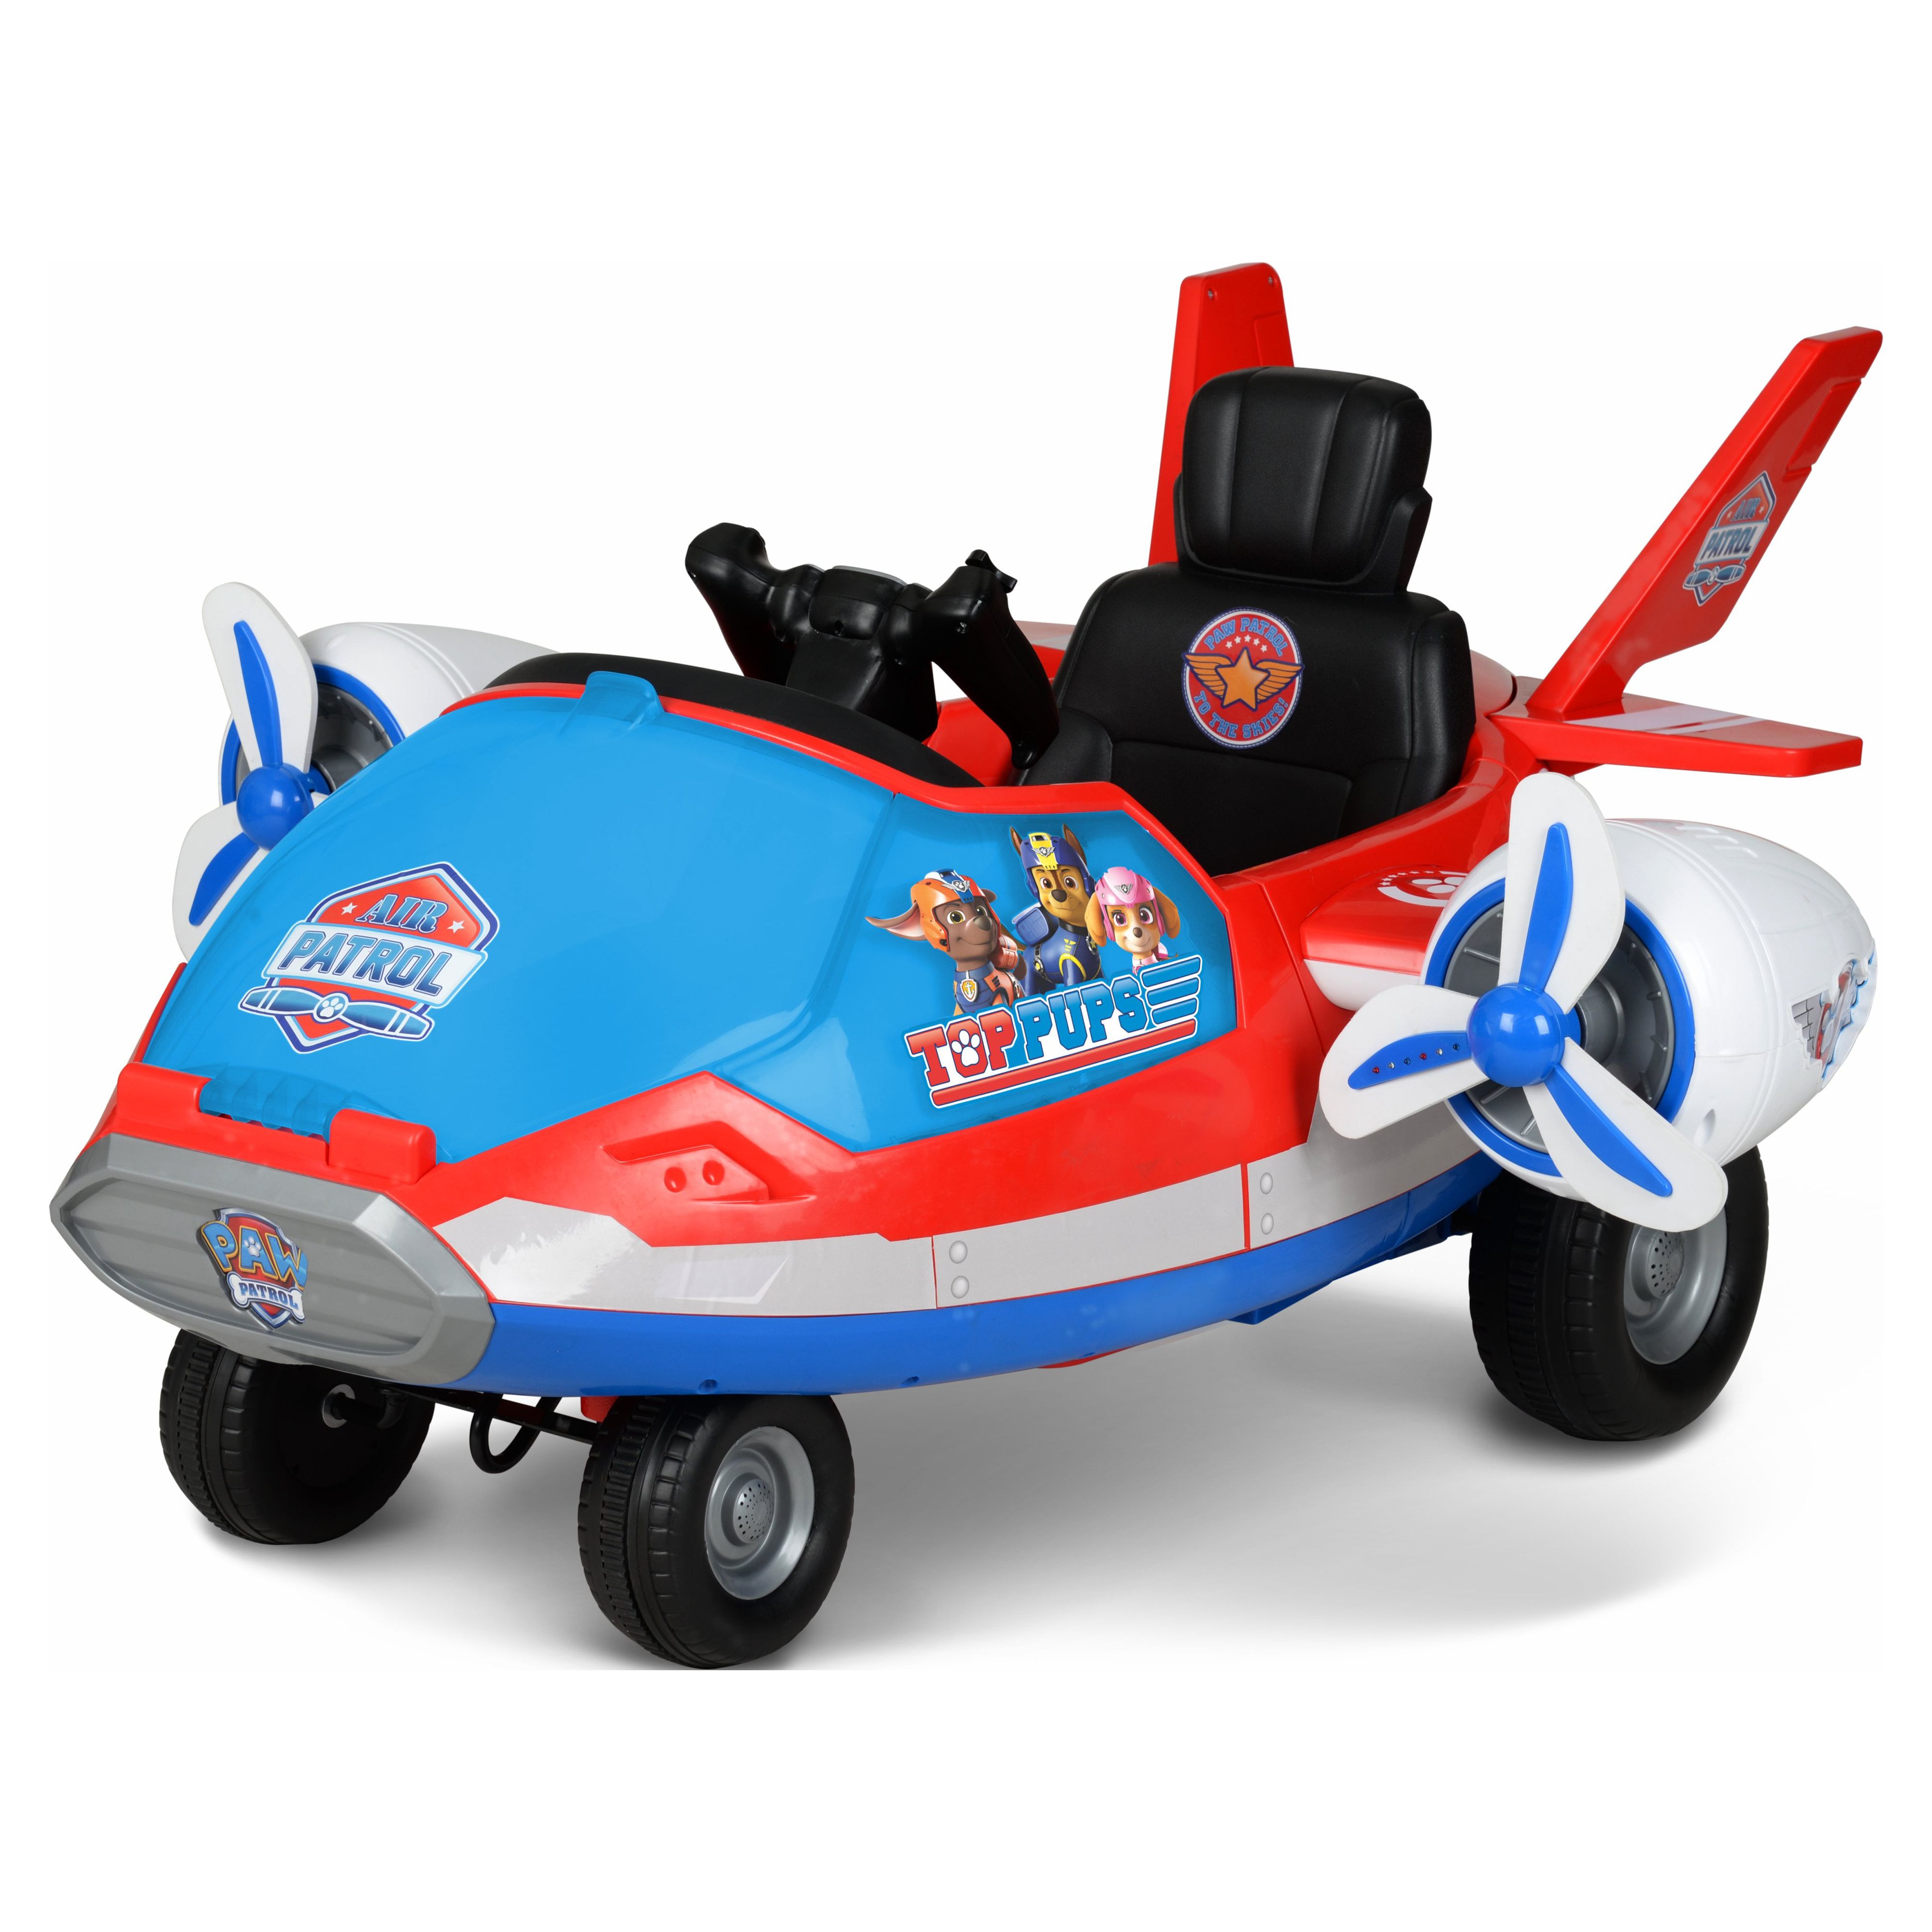 Nickelodeon 12 Volt Paw Patrol Airplane Battery Powered Ride On, for Ages 3 Years and up - image 4 of 11